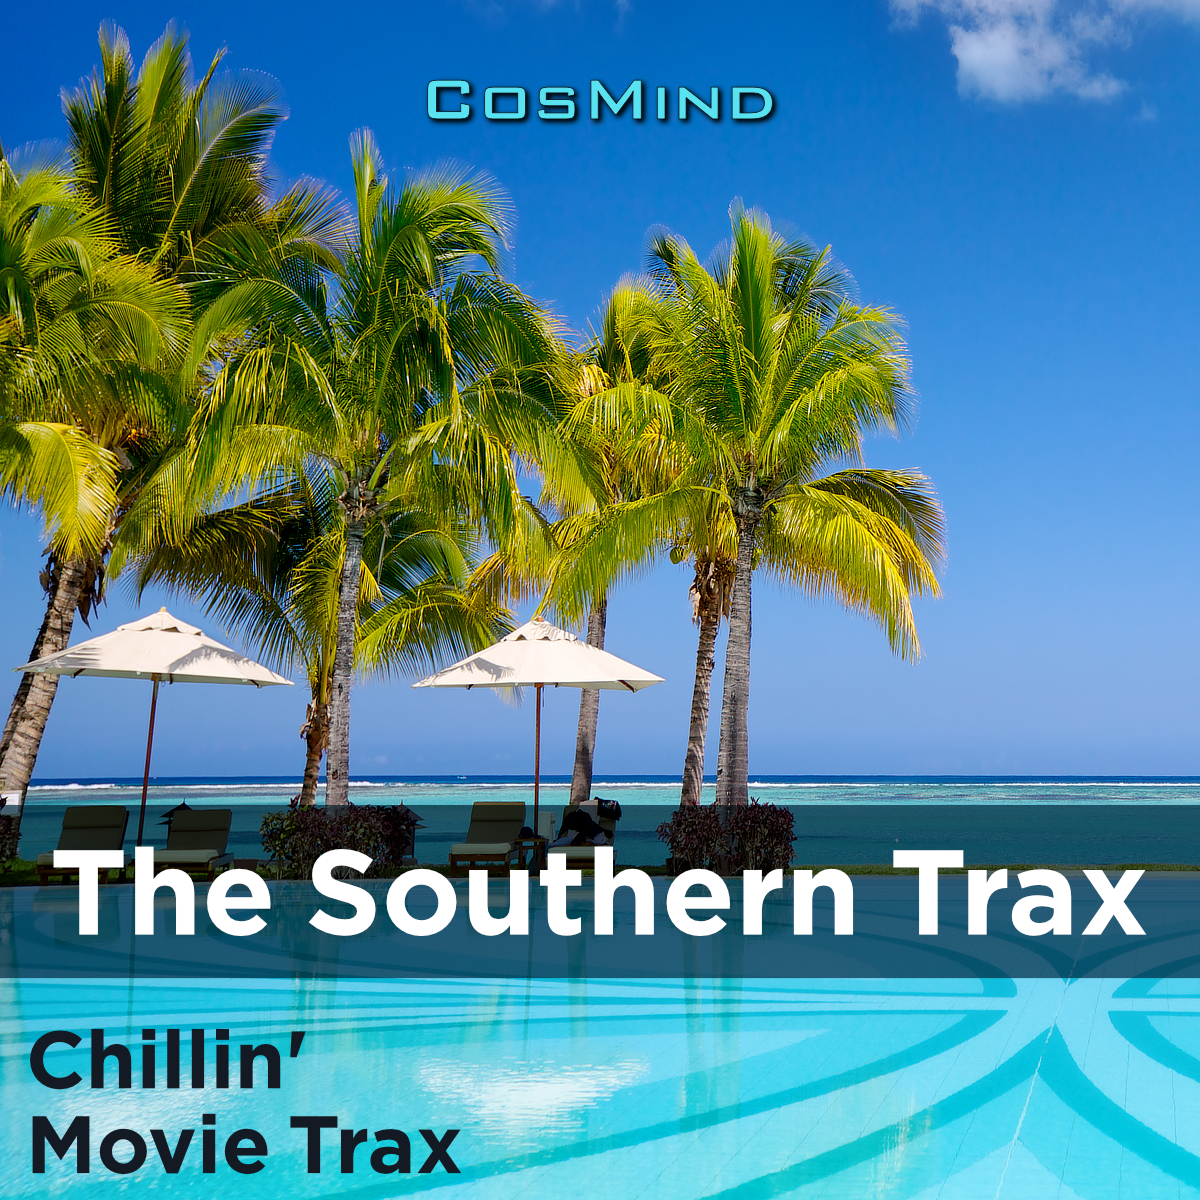 The Southern Trax (Chillin' Movie Trax)